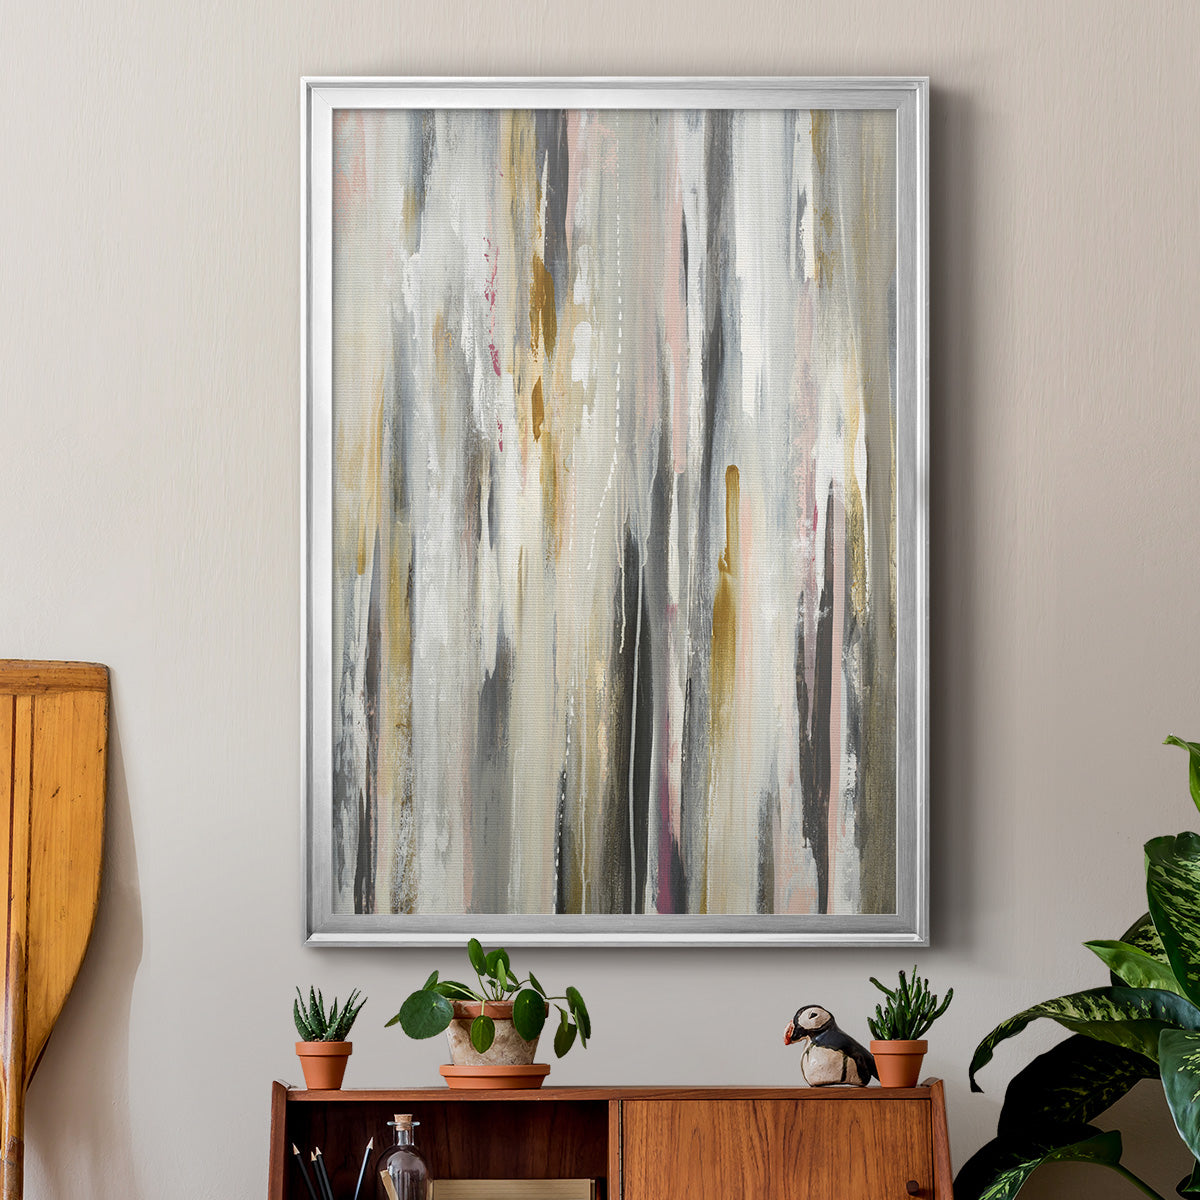 Color Ripple Premium Framed Print - Ready to Hang